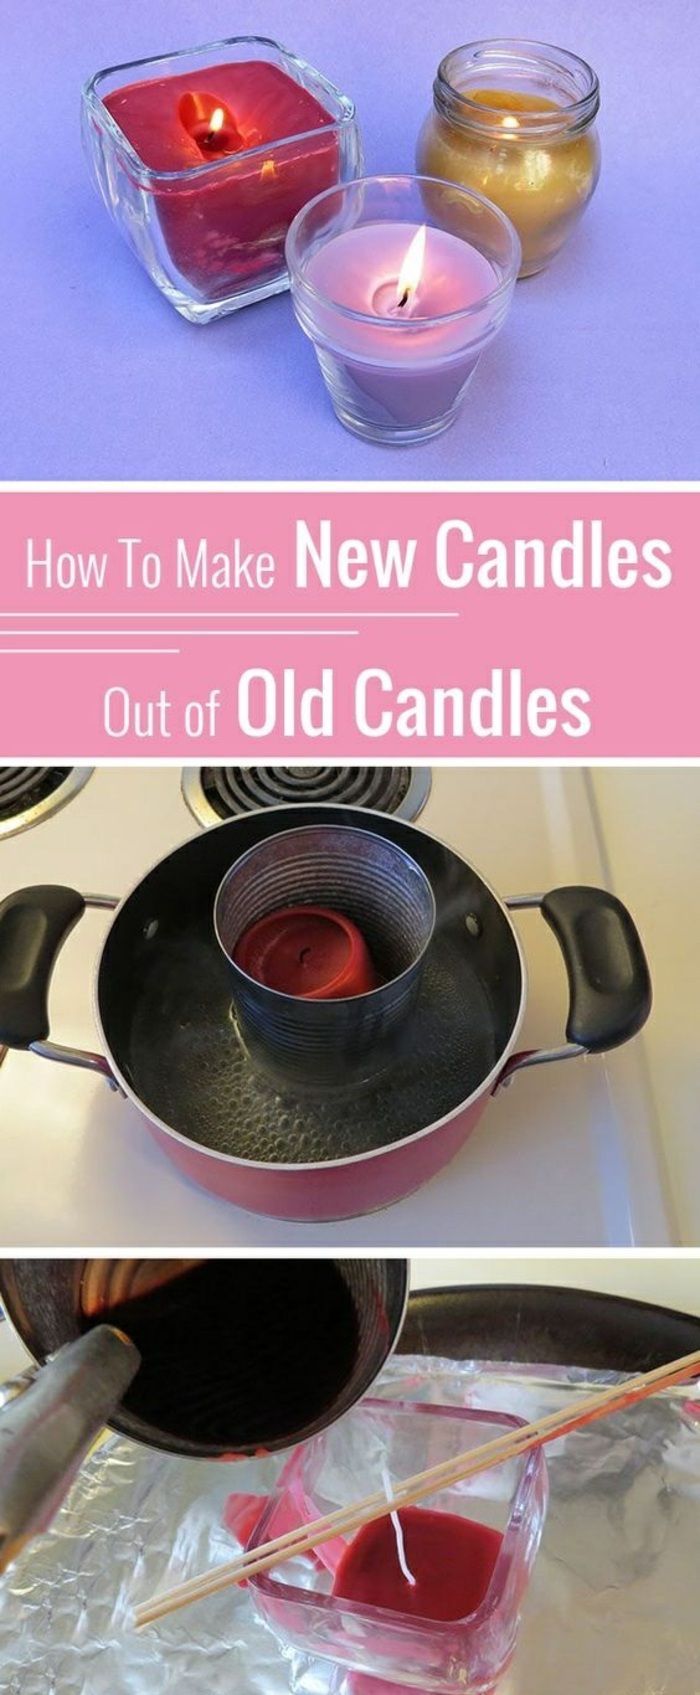 ? 1001 + ideas for amasing and simple DIY candles - ? 1001 + ideas for amasing and simple DIY candles -   15 diy Candles step by step ideas